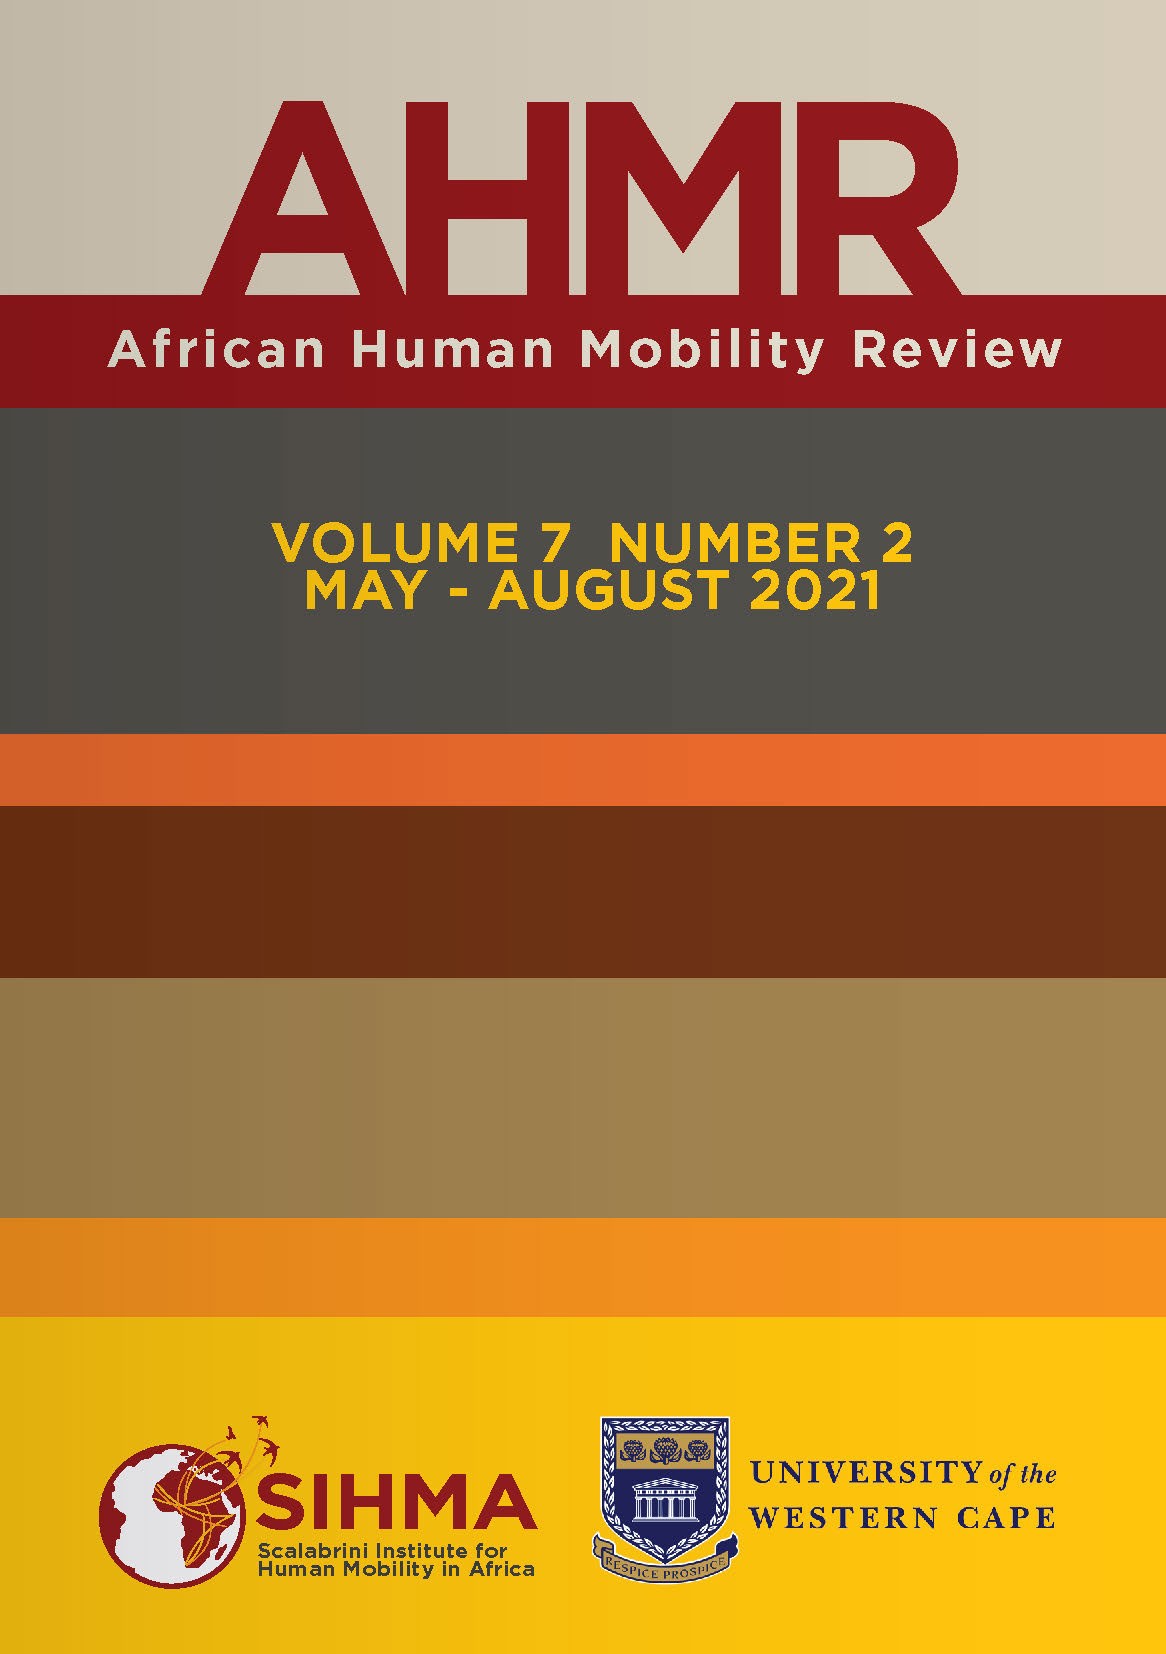 https://sihma.org.za/photos/shares/AHMR COVER ONLINE volume 7 number 2.jpg